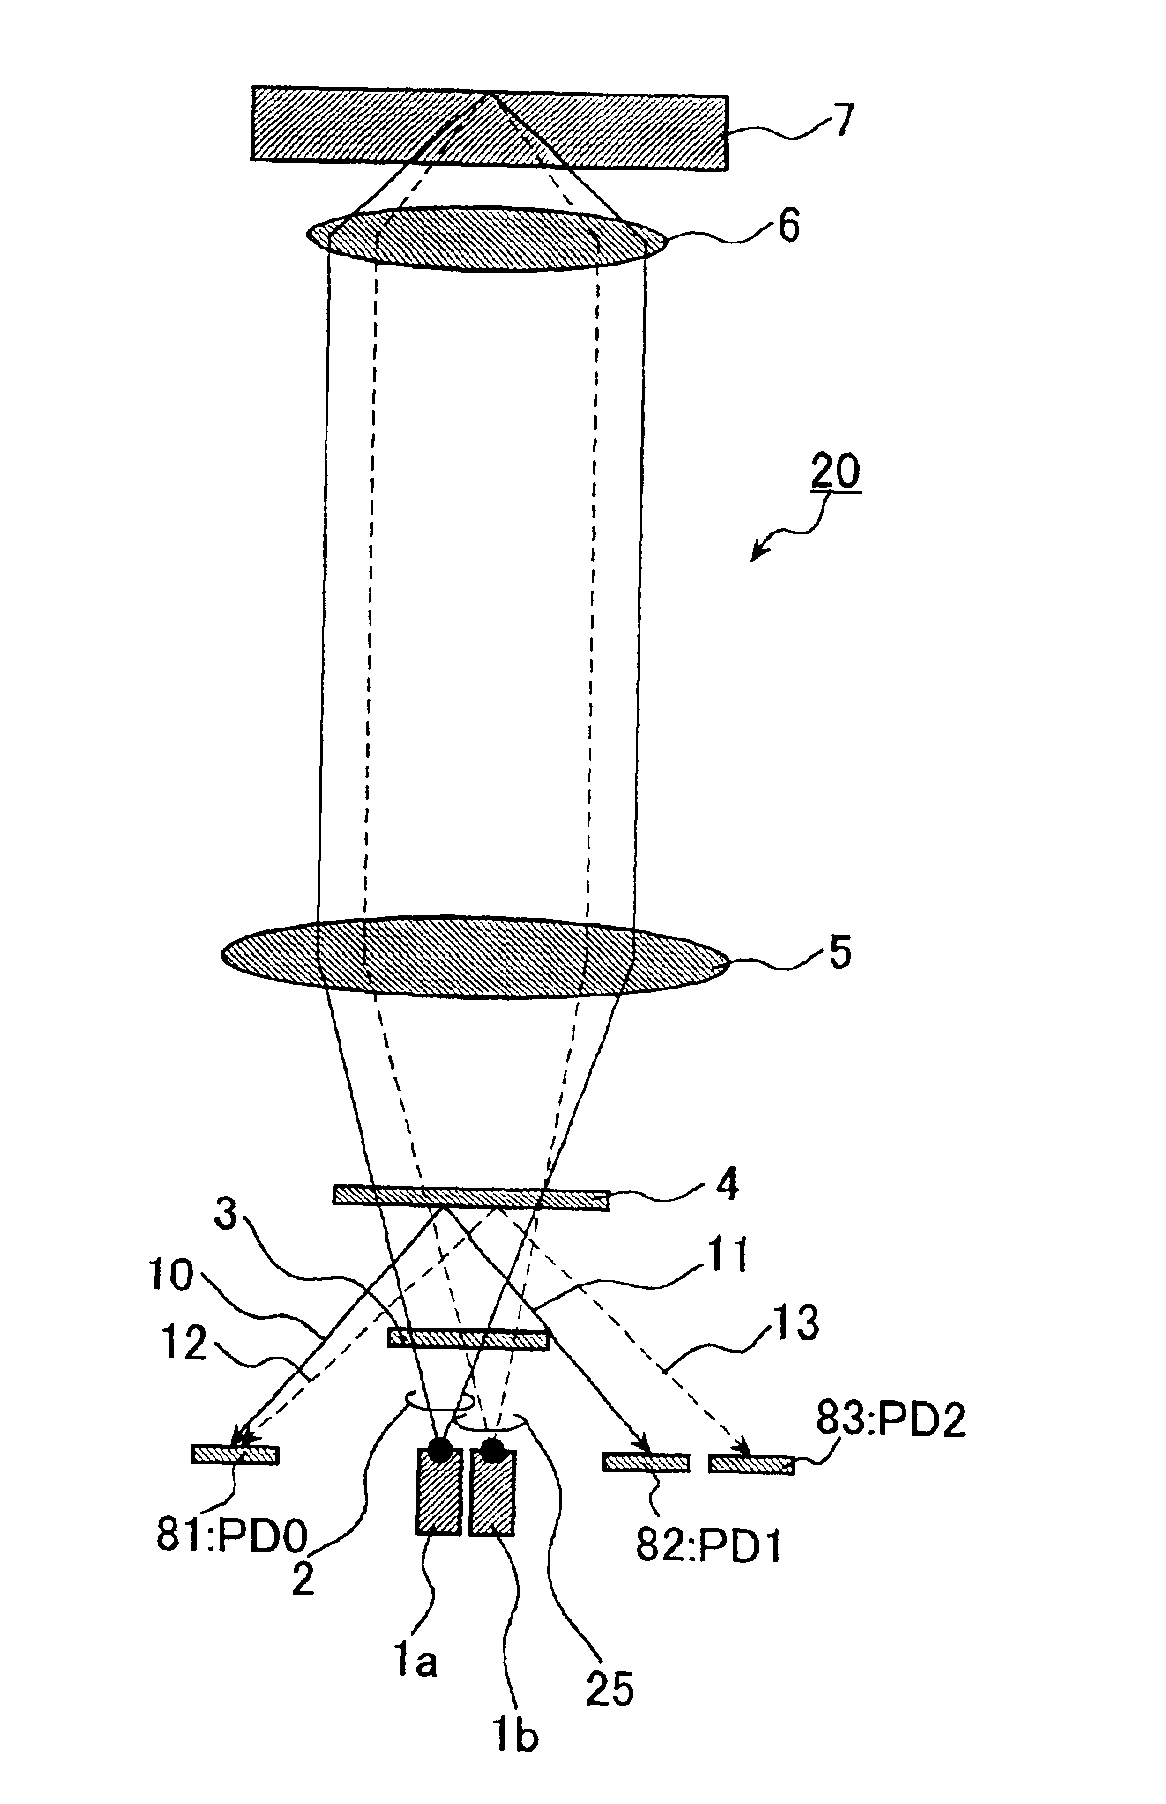 Optical pick-up, optical disk apparatus and information processing apparatus